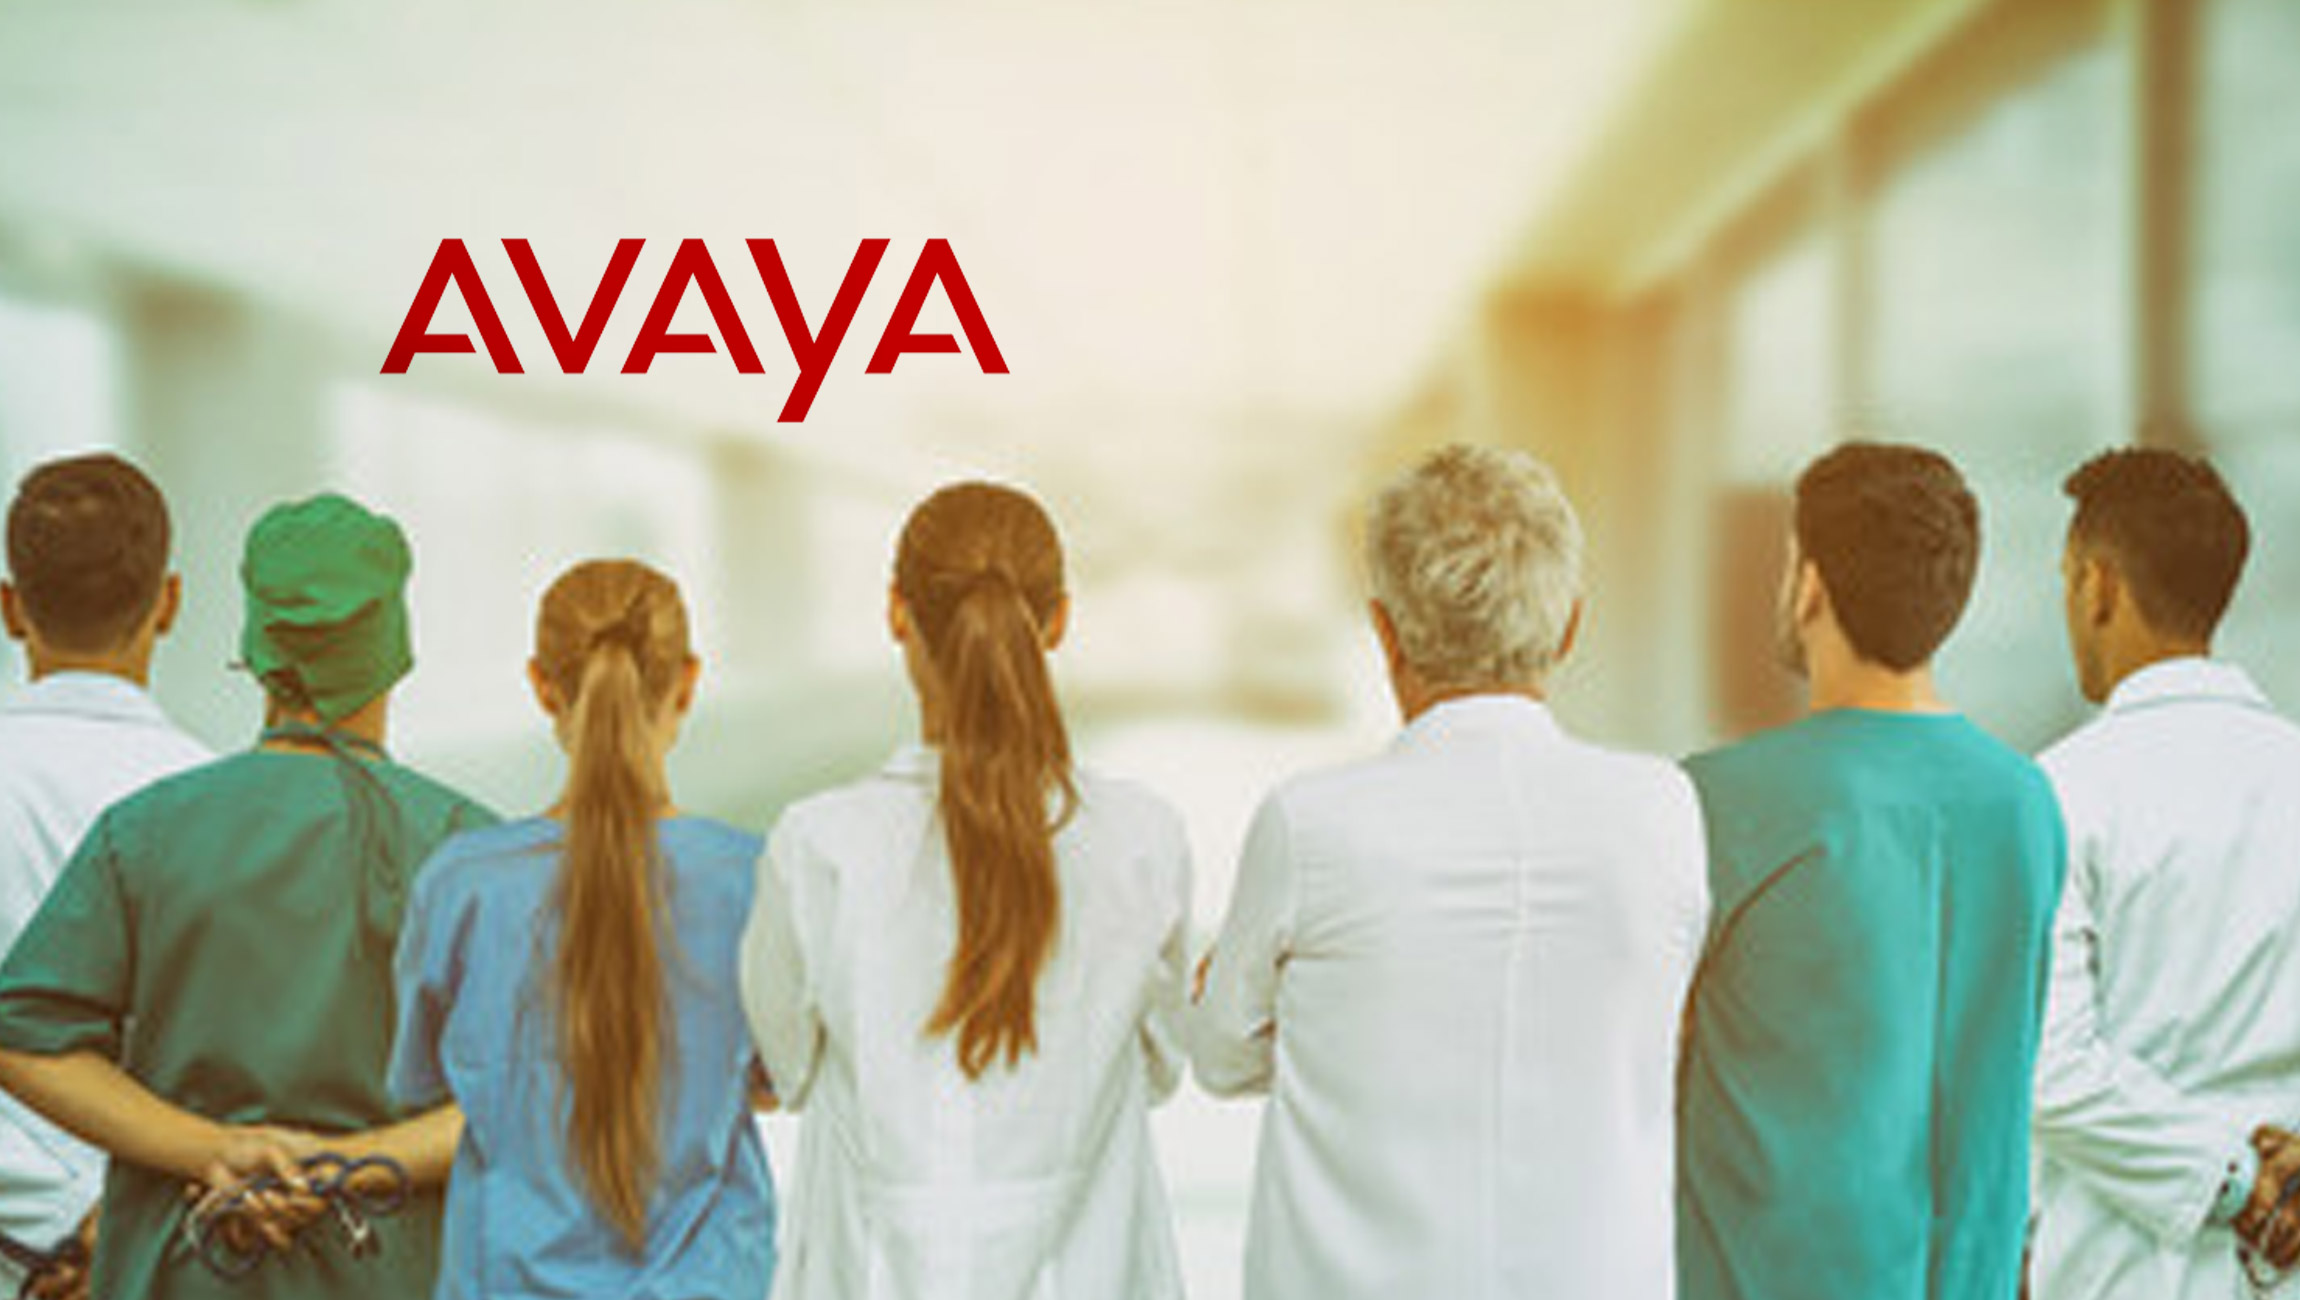 Avaya-to-Showcase-Healthcare-Solutions-That-Deliver-Superior-Patient-and-Provider-Experiences-at-HIMSS-2022-Global-Health-Conference-_-Exhibition